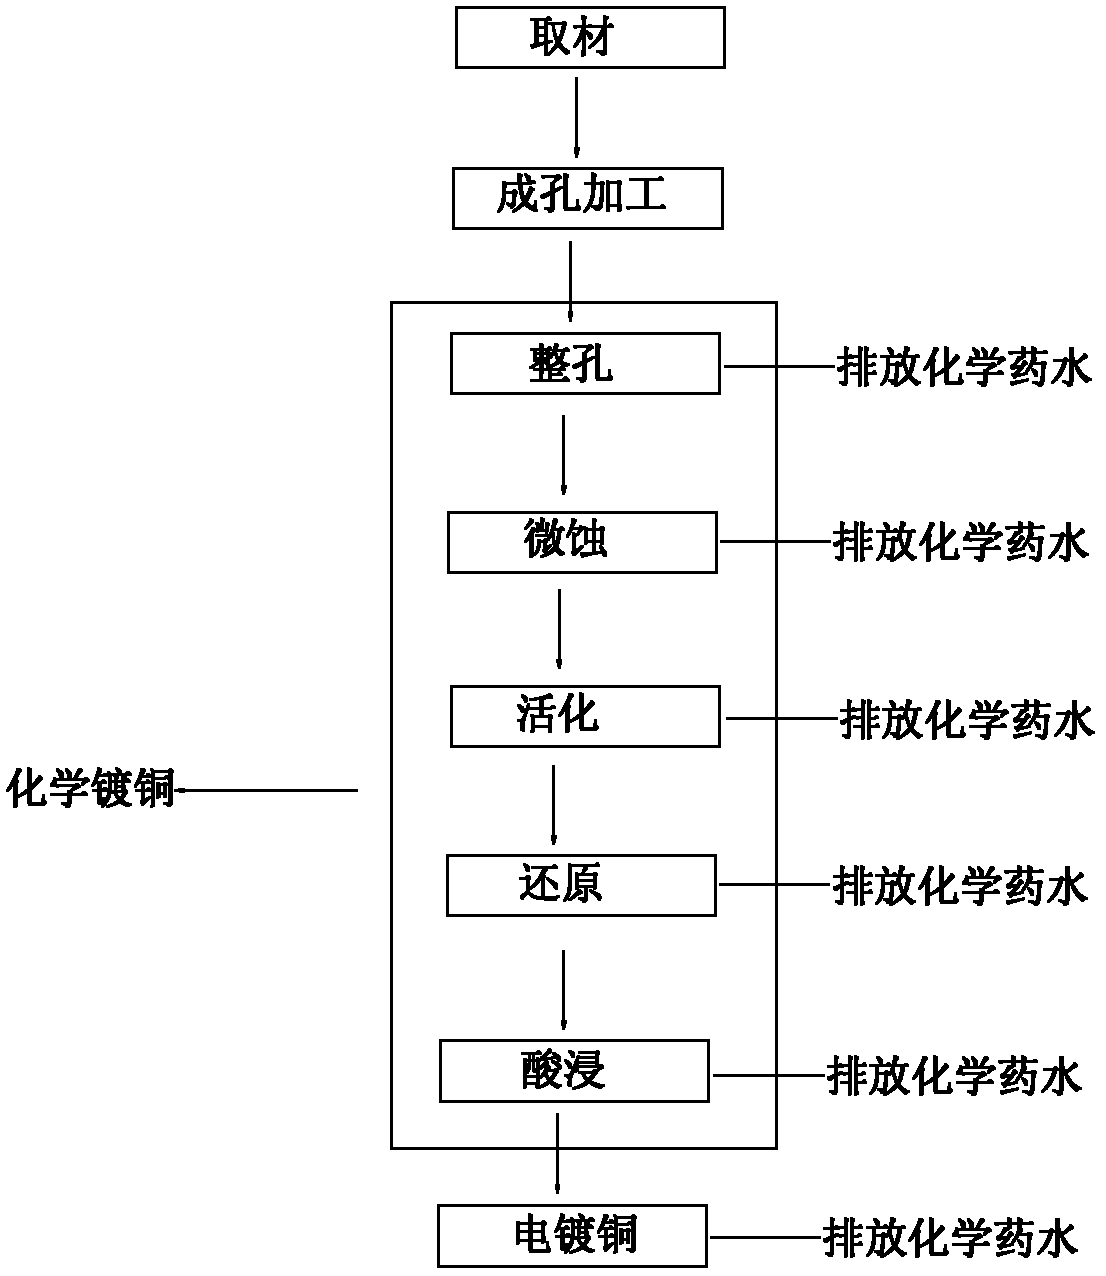 Manufacturing process of interlayer copper connector of printed circuit board